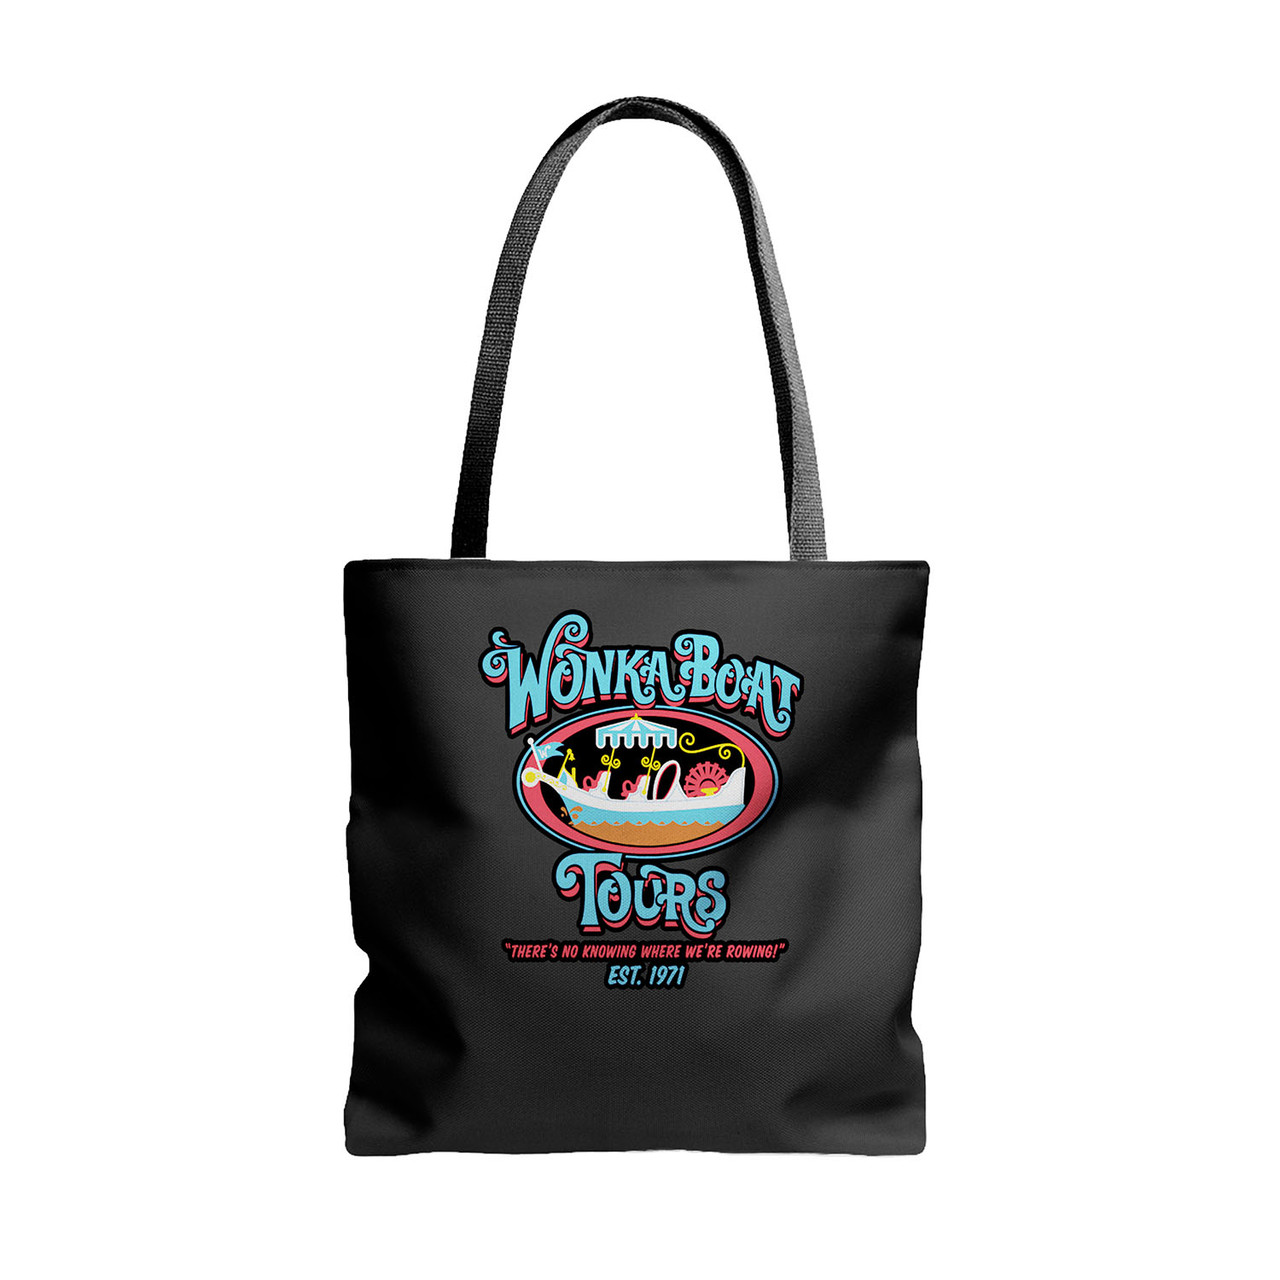 Wonka Boat Tours Tote Bags